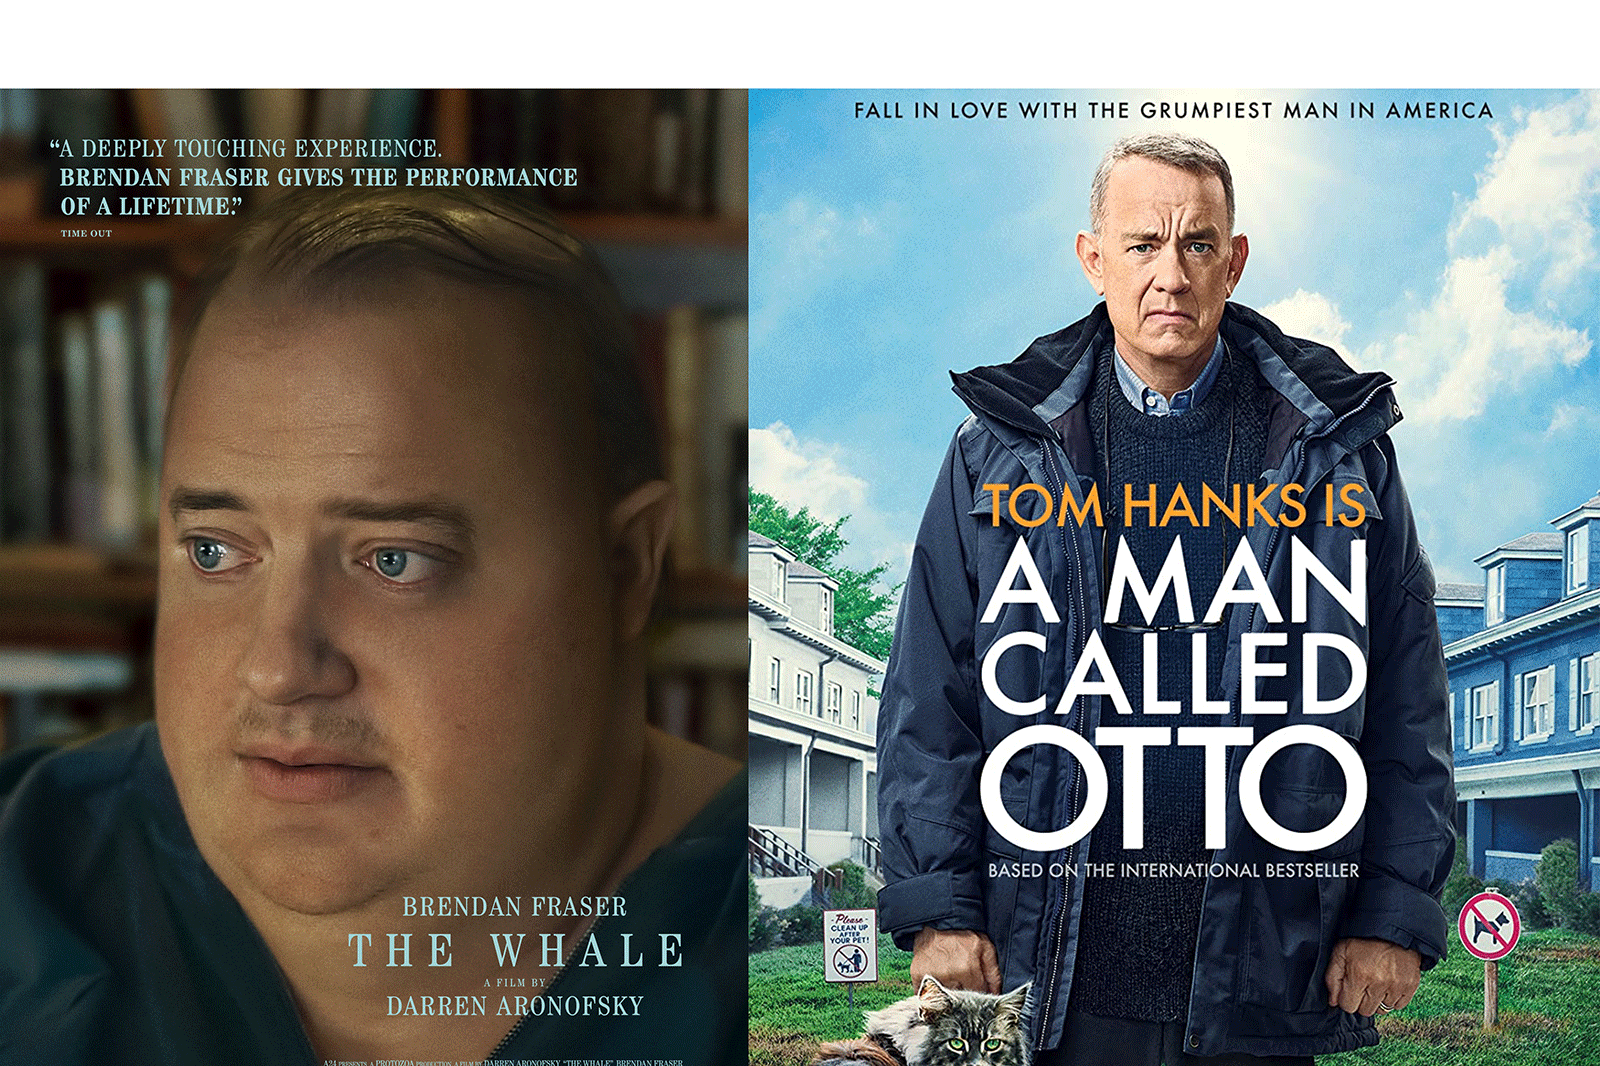 Double feature The Whale and A Man Called Otto are similar, yet so different